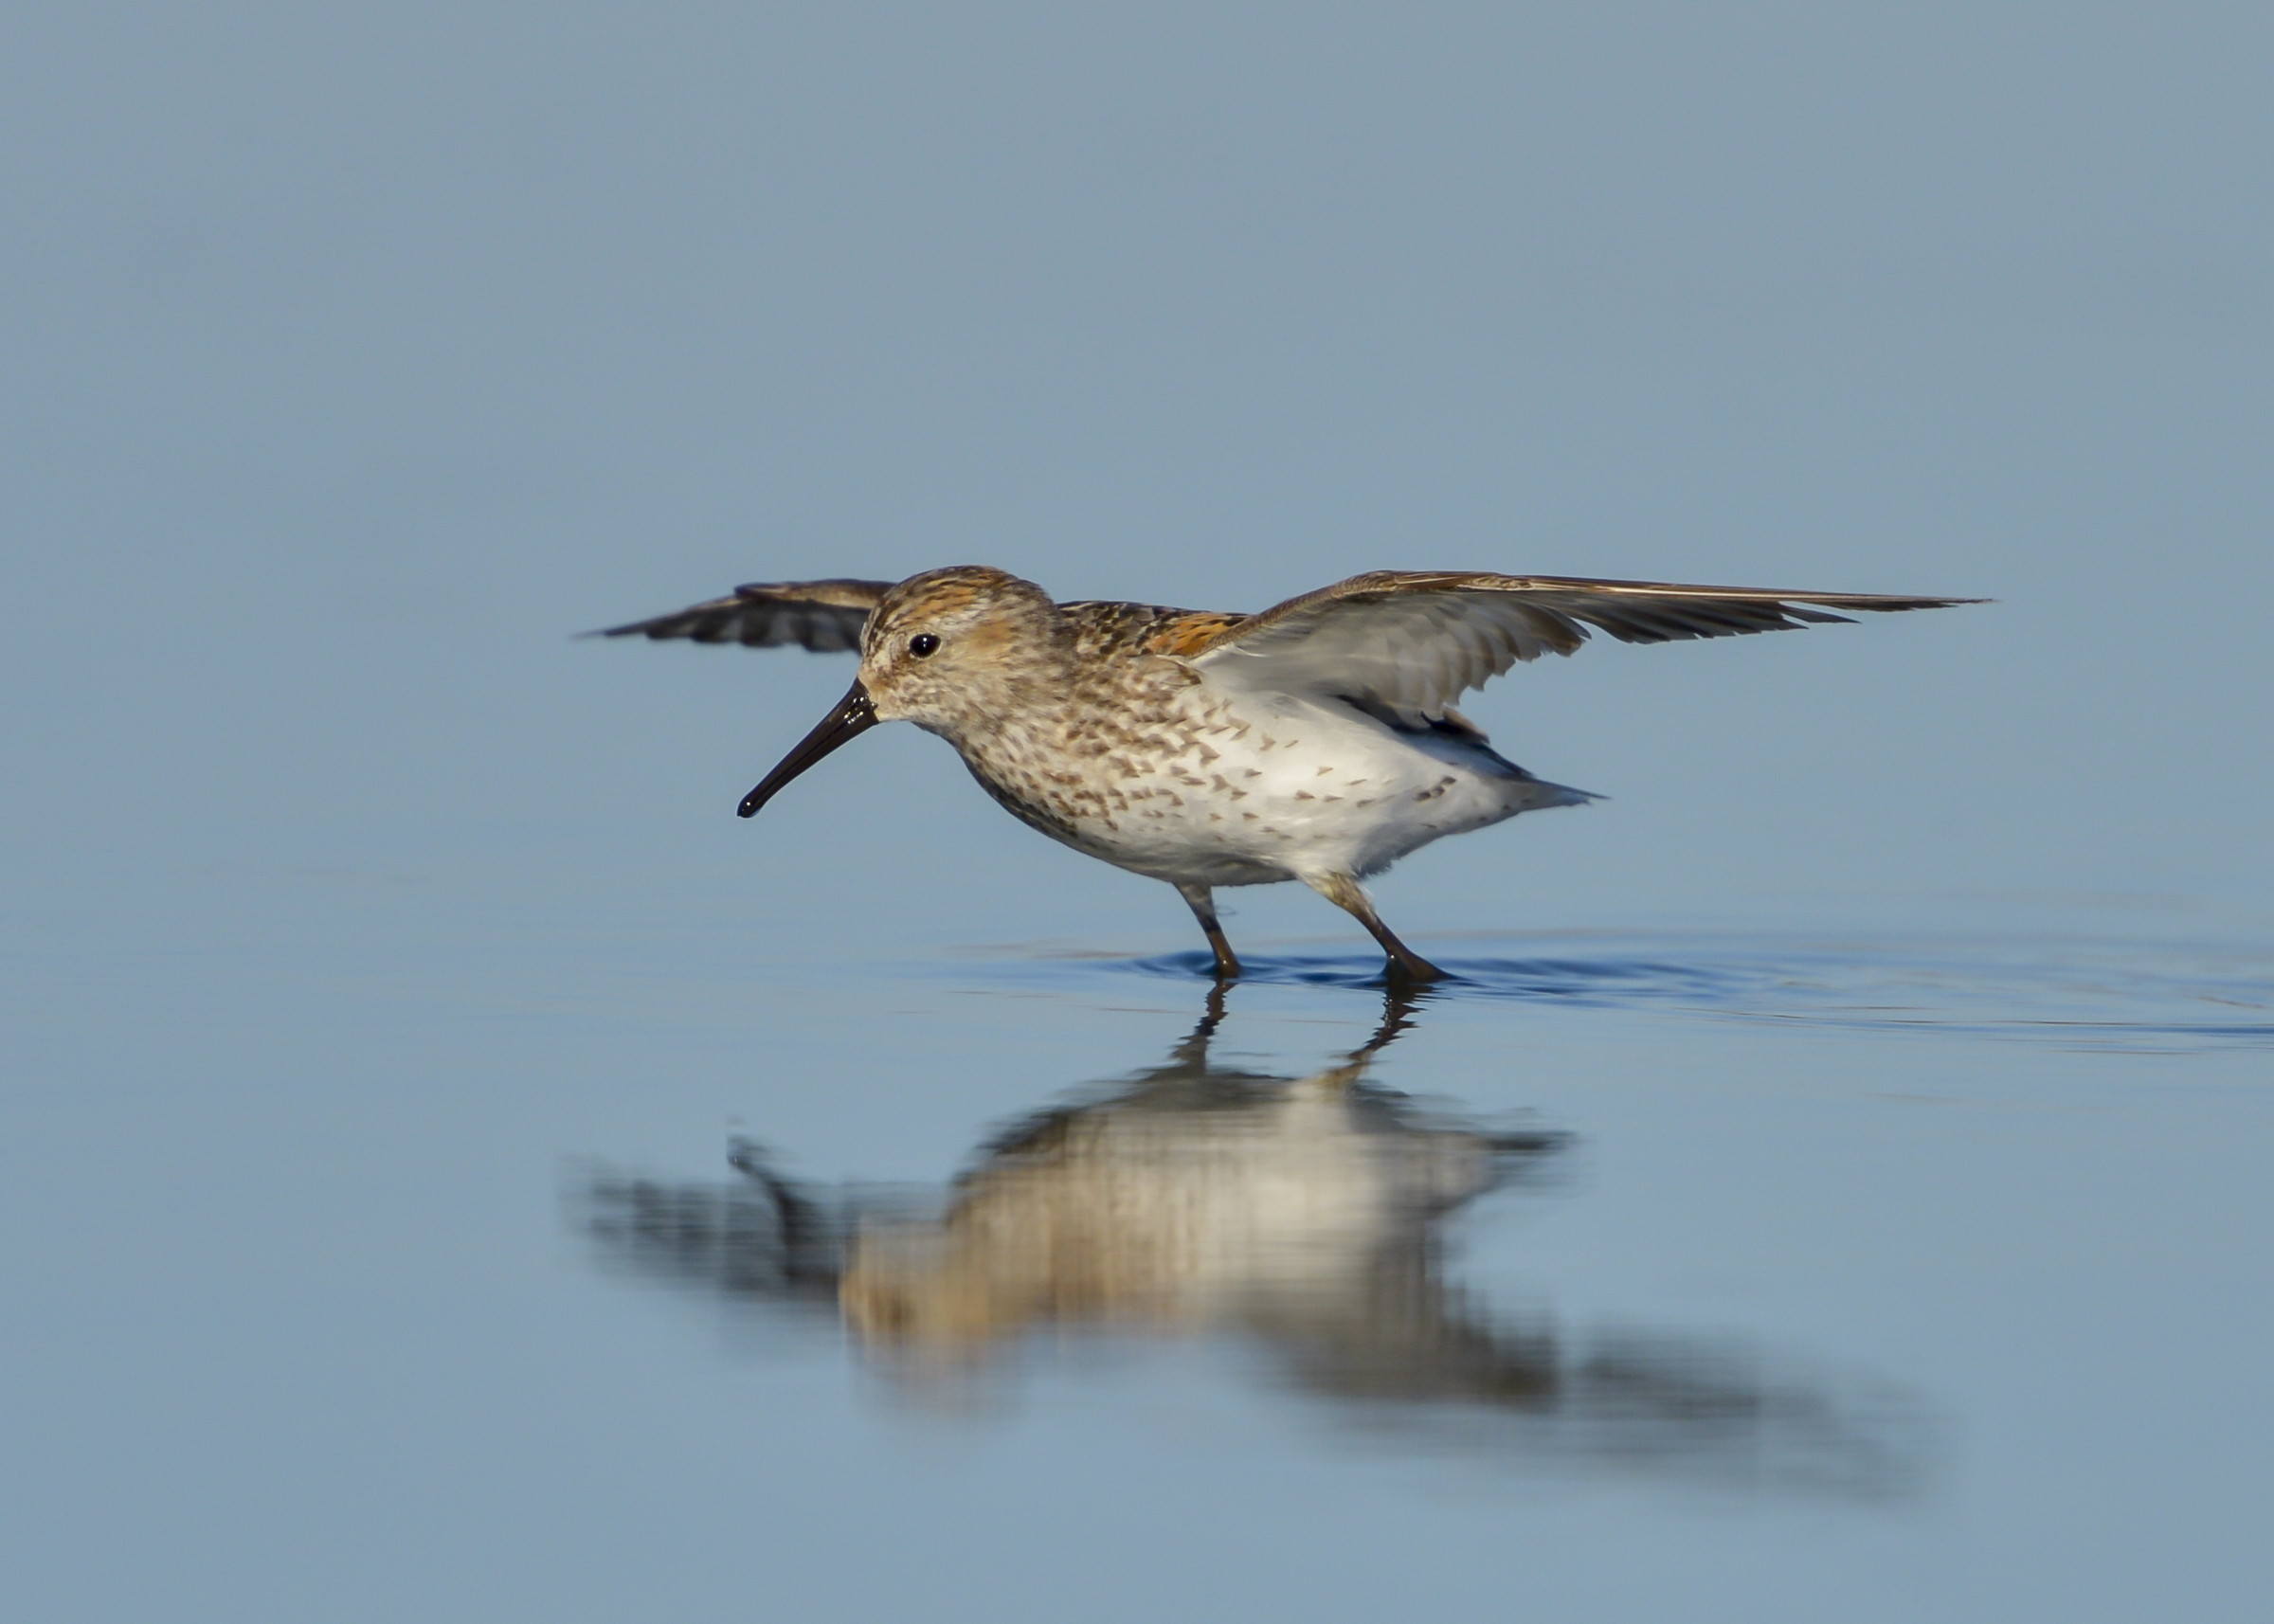 Western Sandpiper walking in the shallow water with its wings outstretched.